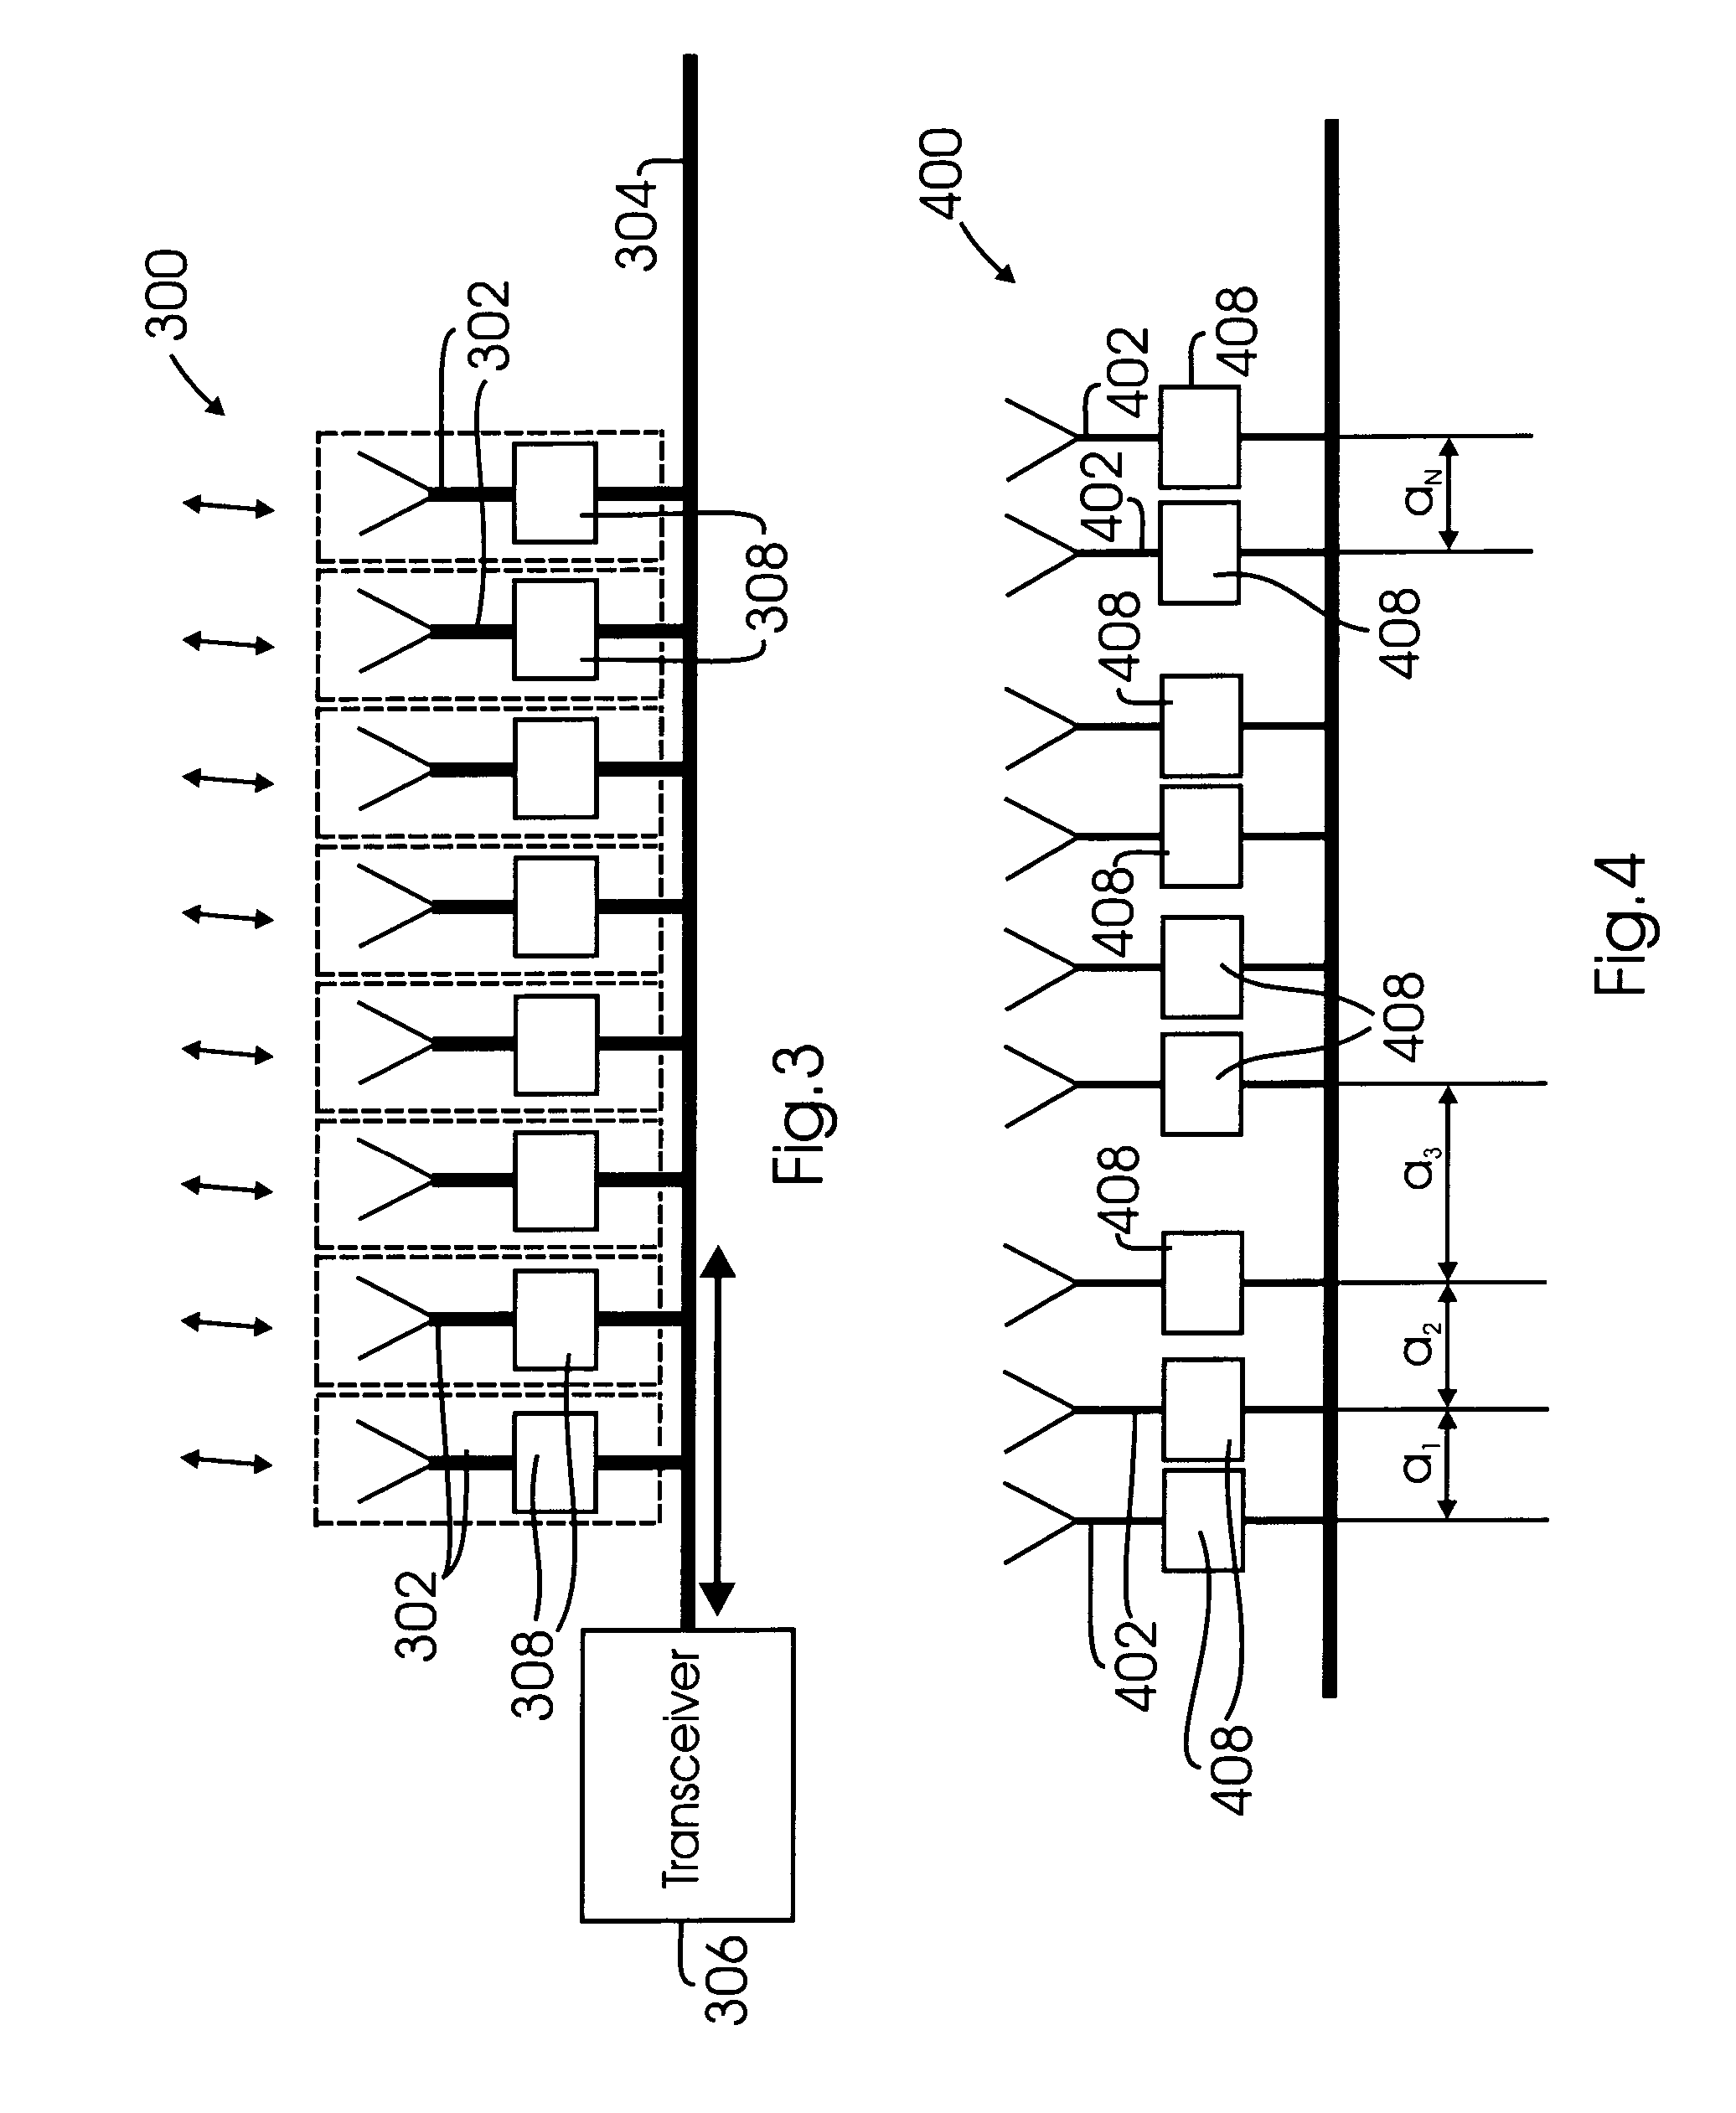 Beam-forming antenna with amplitude-controlled antenna elements